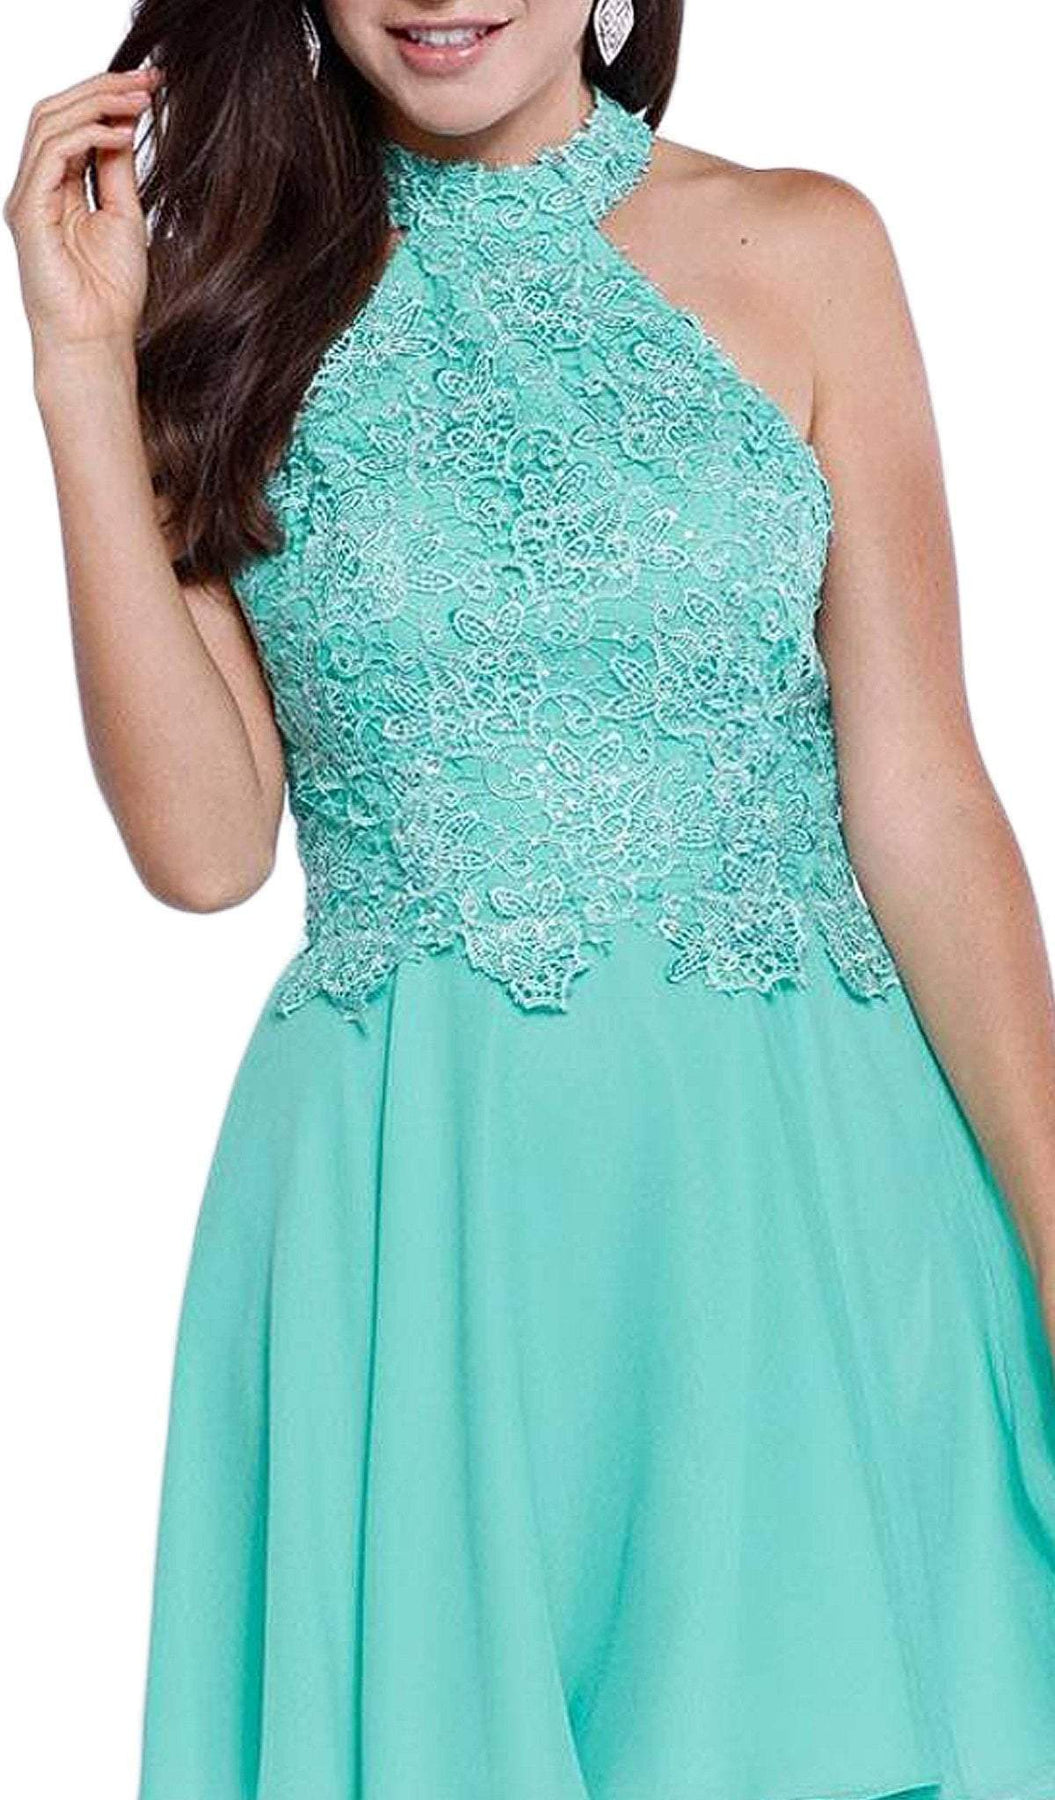 Nox Anabel - 6210 Lace Halter Neck Dress Special Occasion Dress